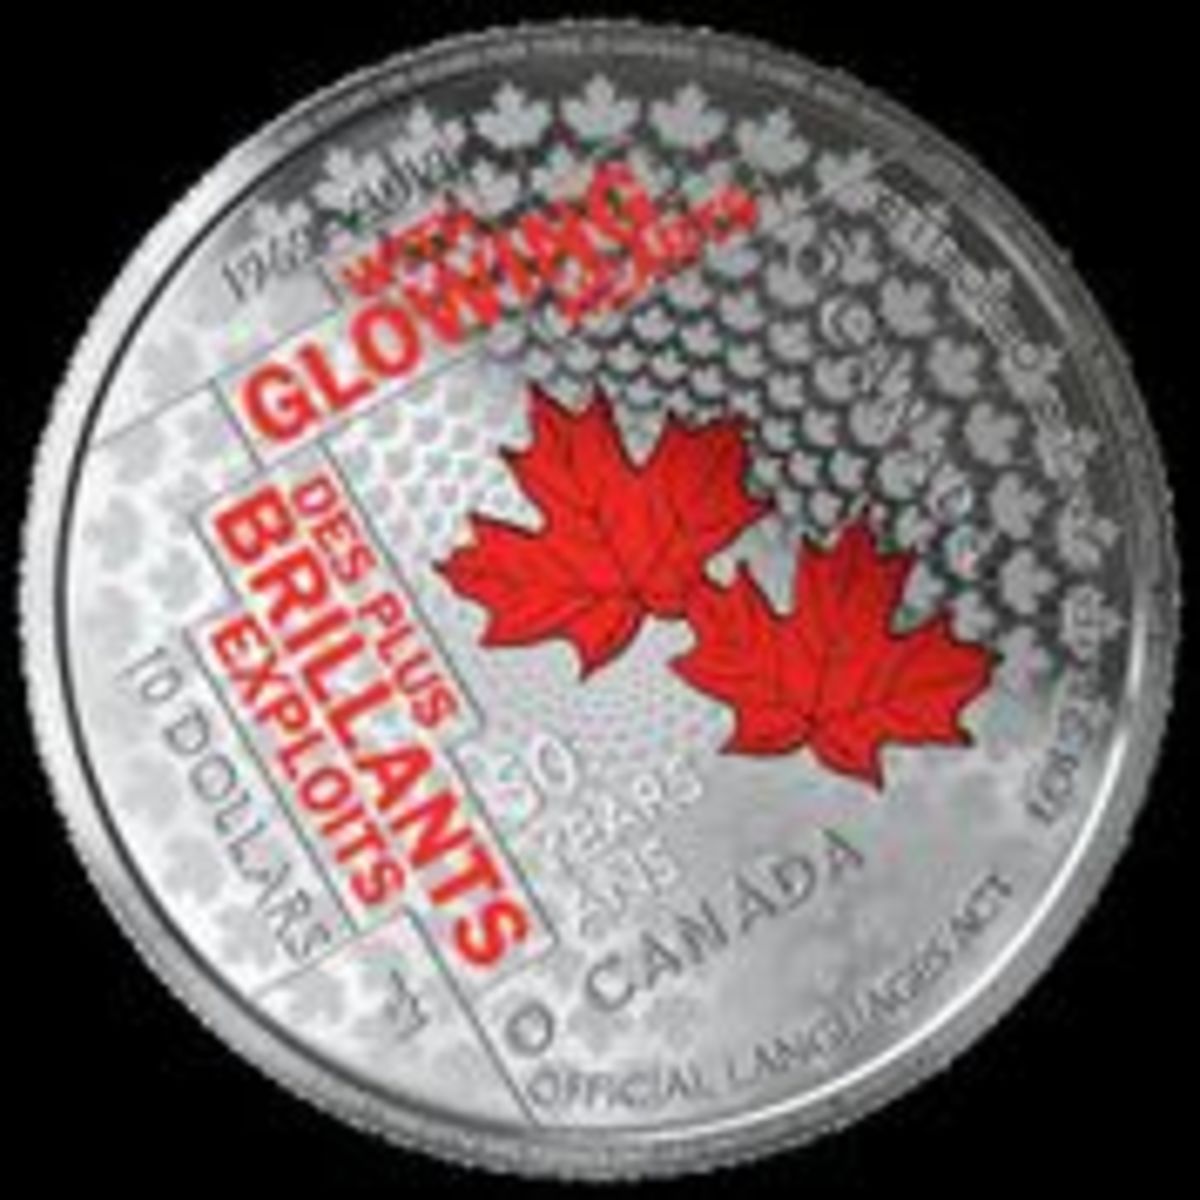  Designed by artist Joel Kimmel, the reverse of this coin dated 1969-2019 is accented by maple leaves and the familiar words “WITH GLOWING HEARTS”, “DES PLUS BRILLIANTS EXPLOITS”, all colored in bright red.